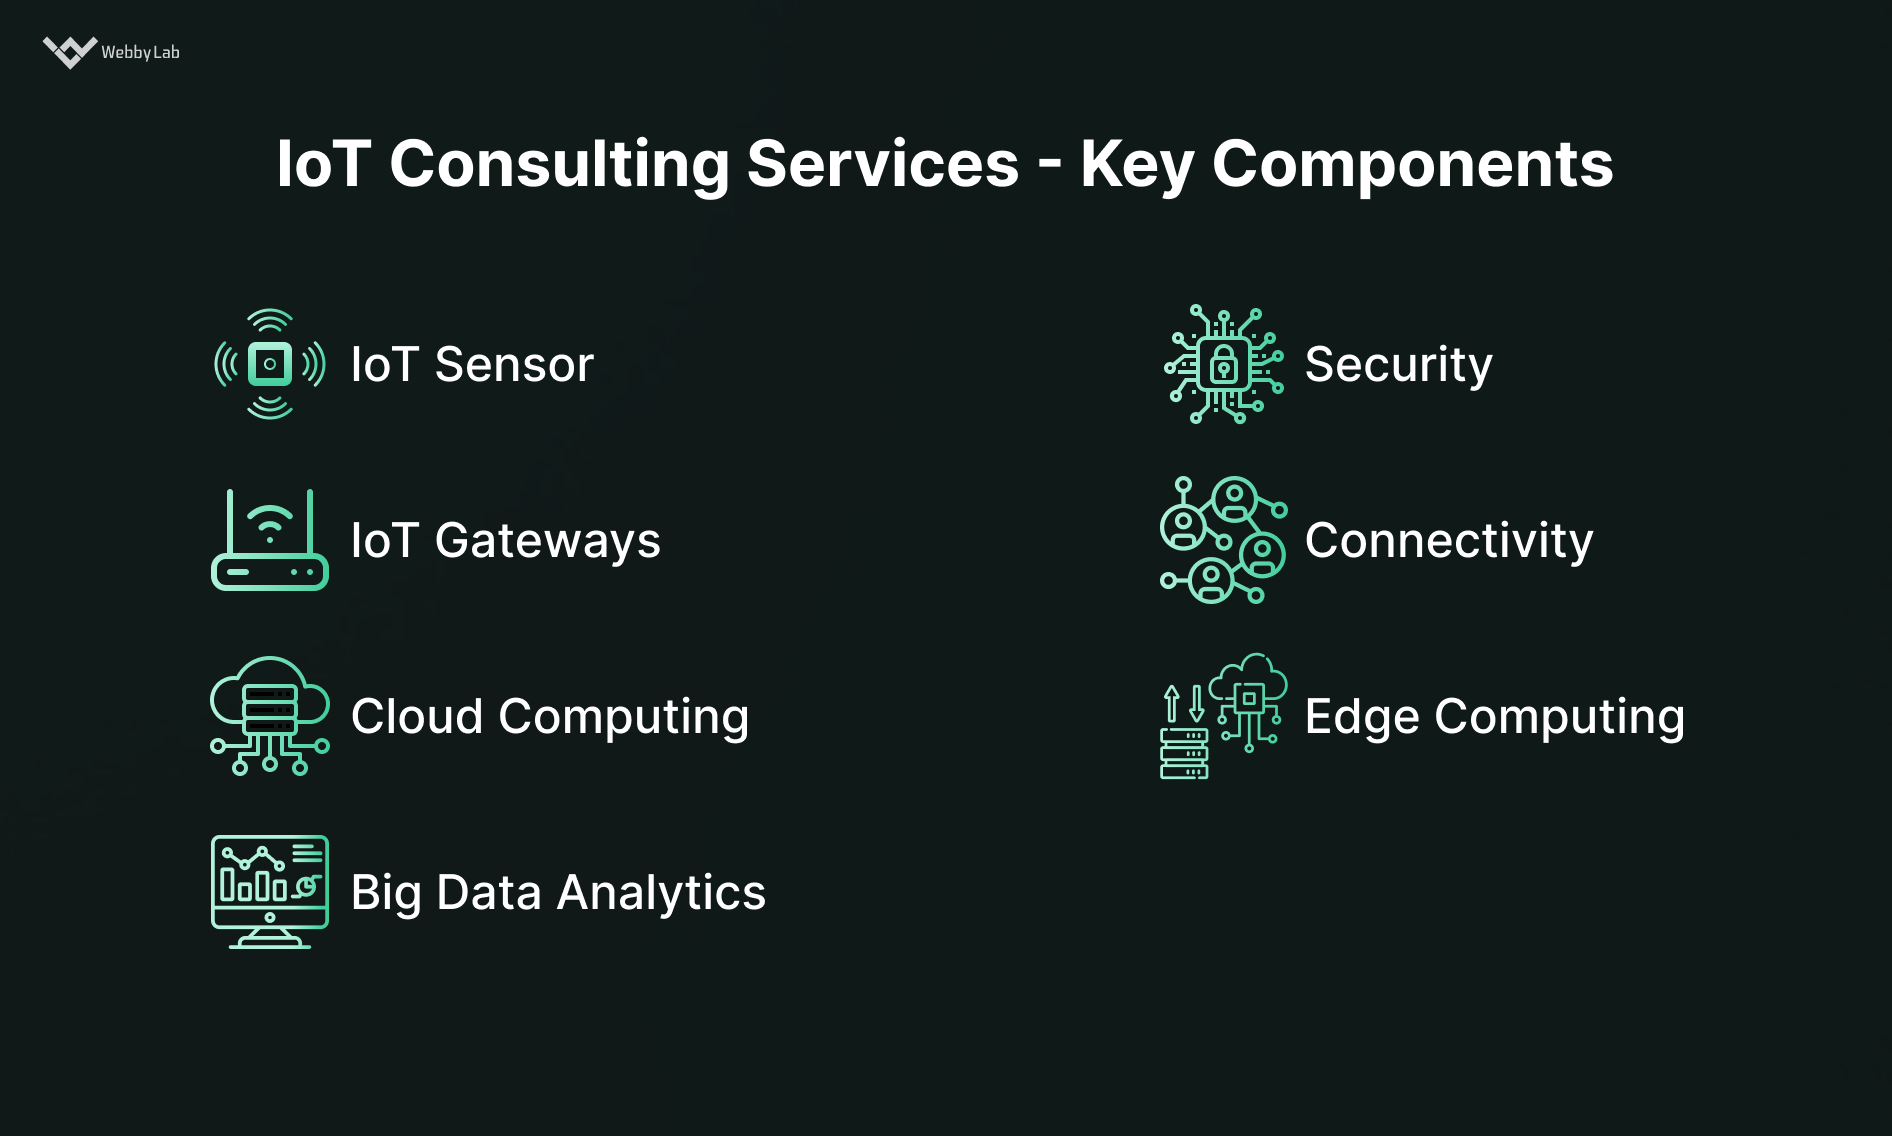 IoT consulting key components